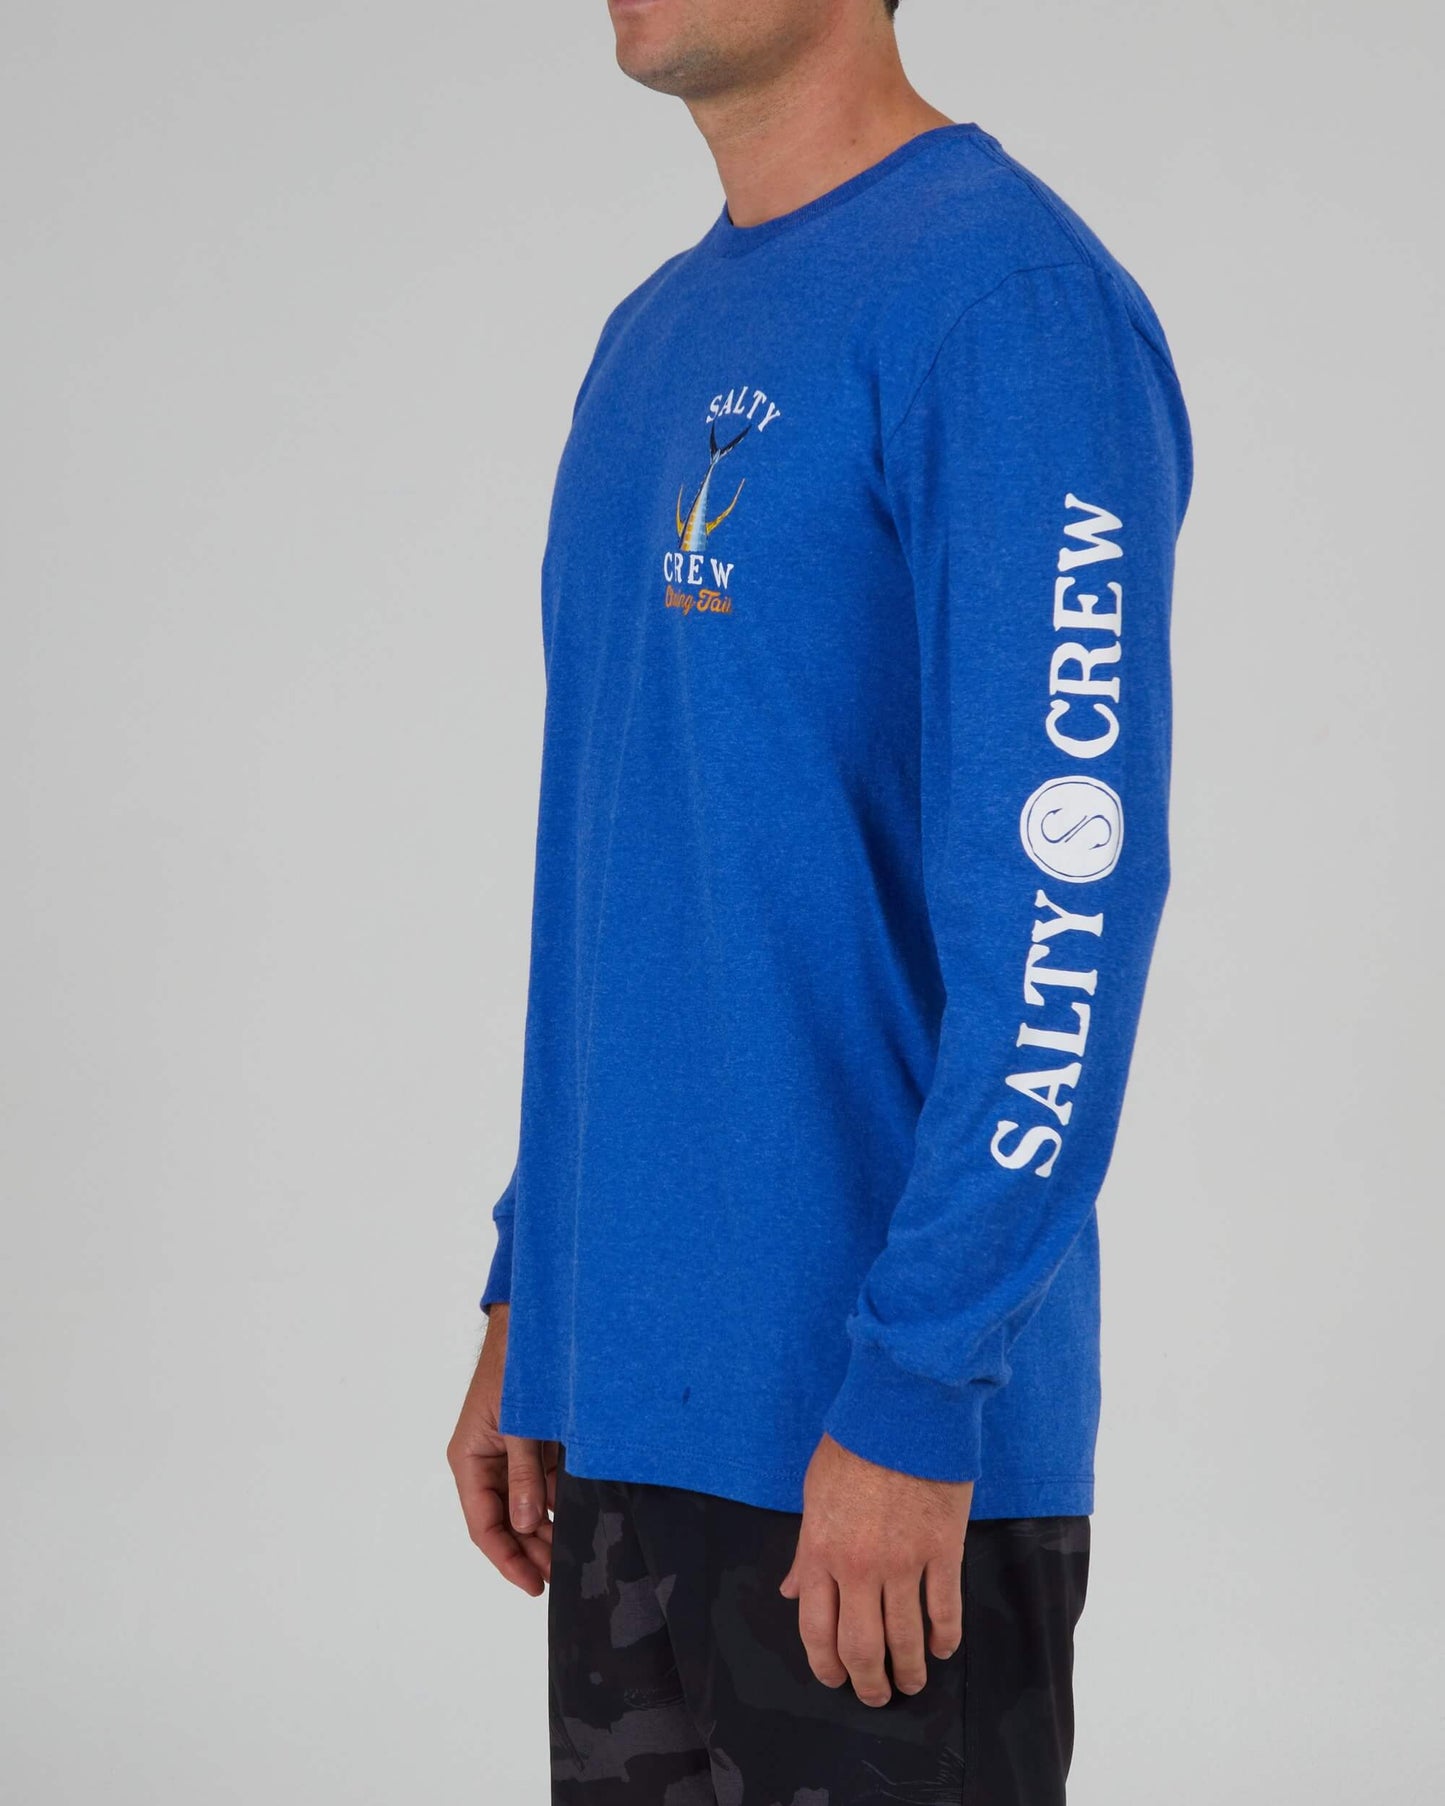 Salty Crew Men - Tailed L/S - Royal Heather